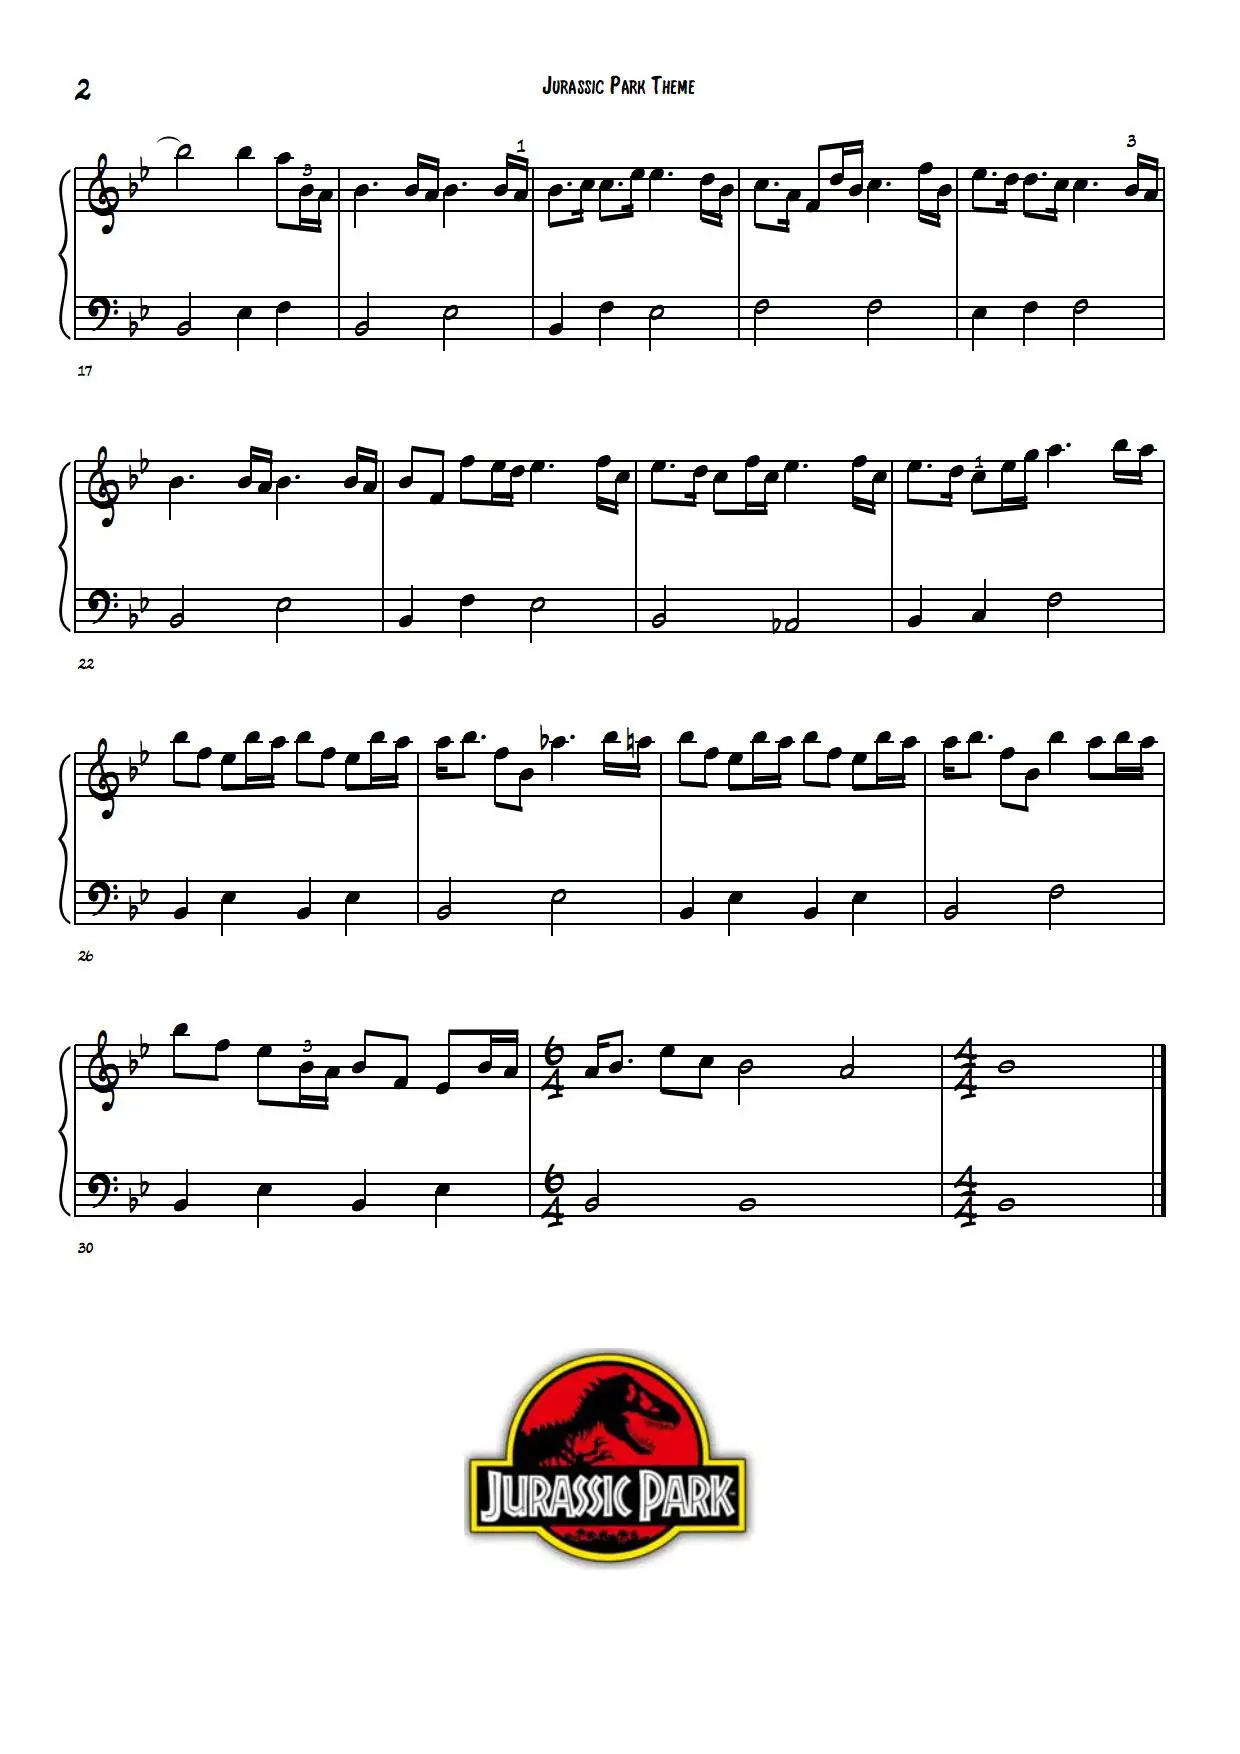 Jurassic Park Theme-2 easy piano sheet music notes chords beginners pdf